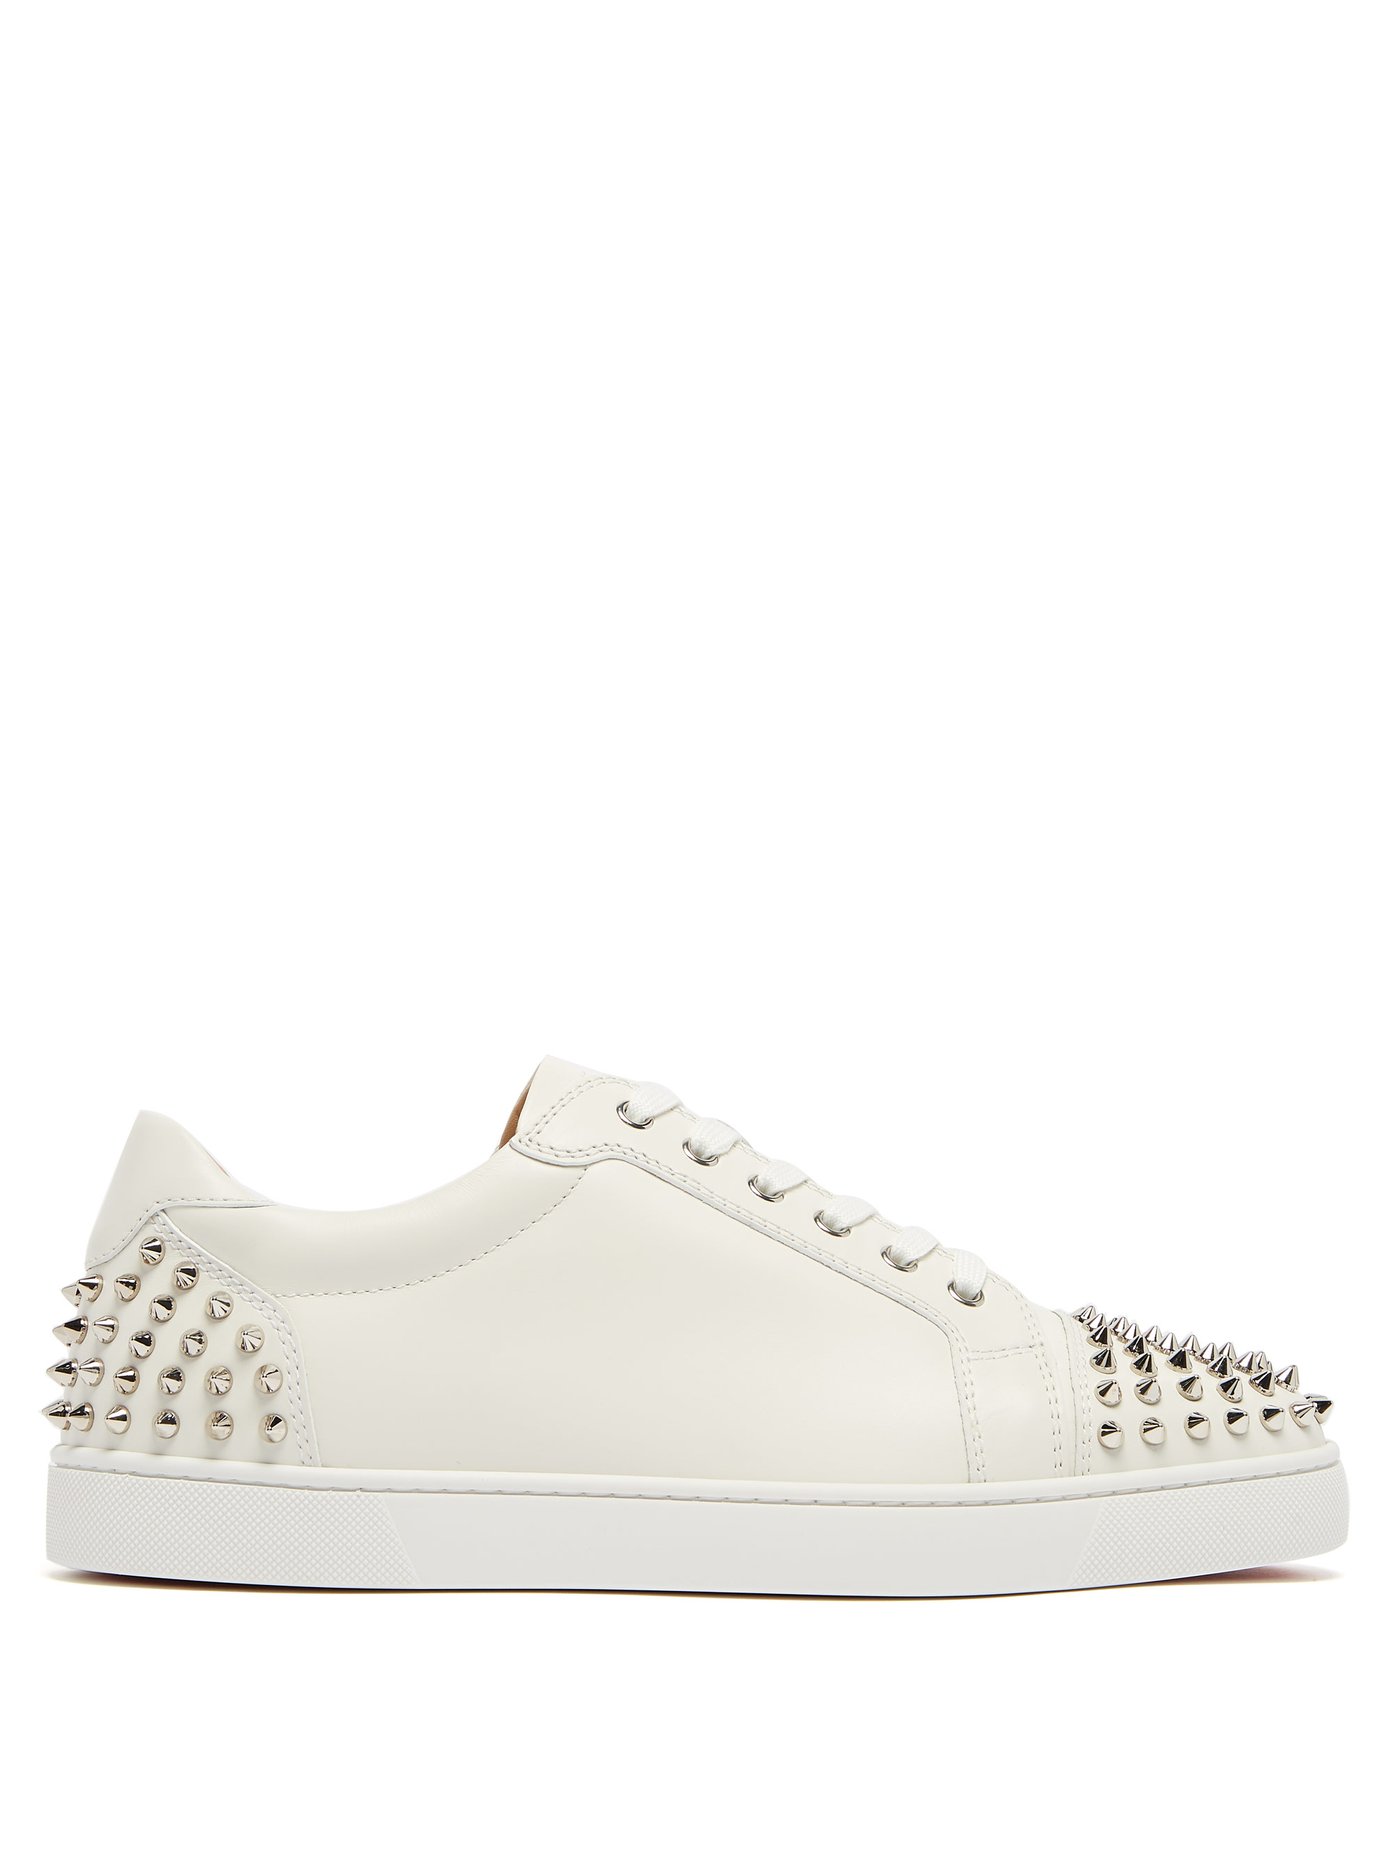 low top spiked louboutins